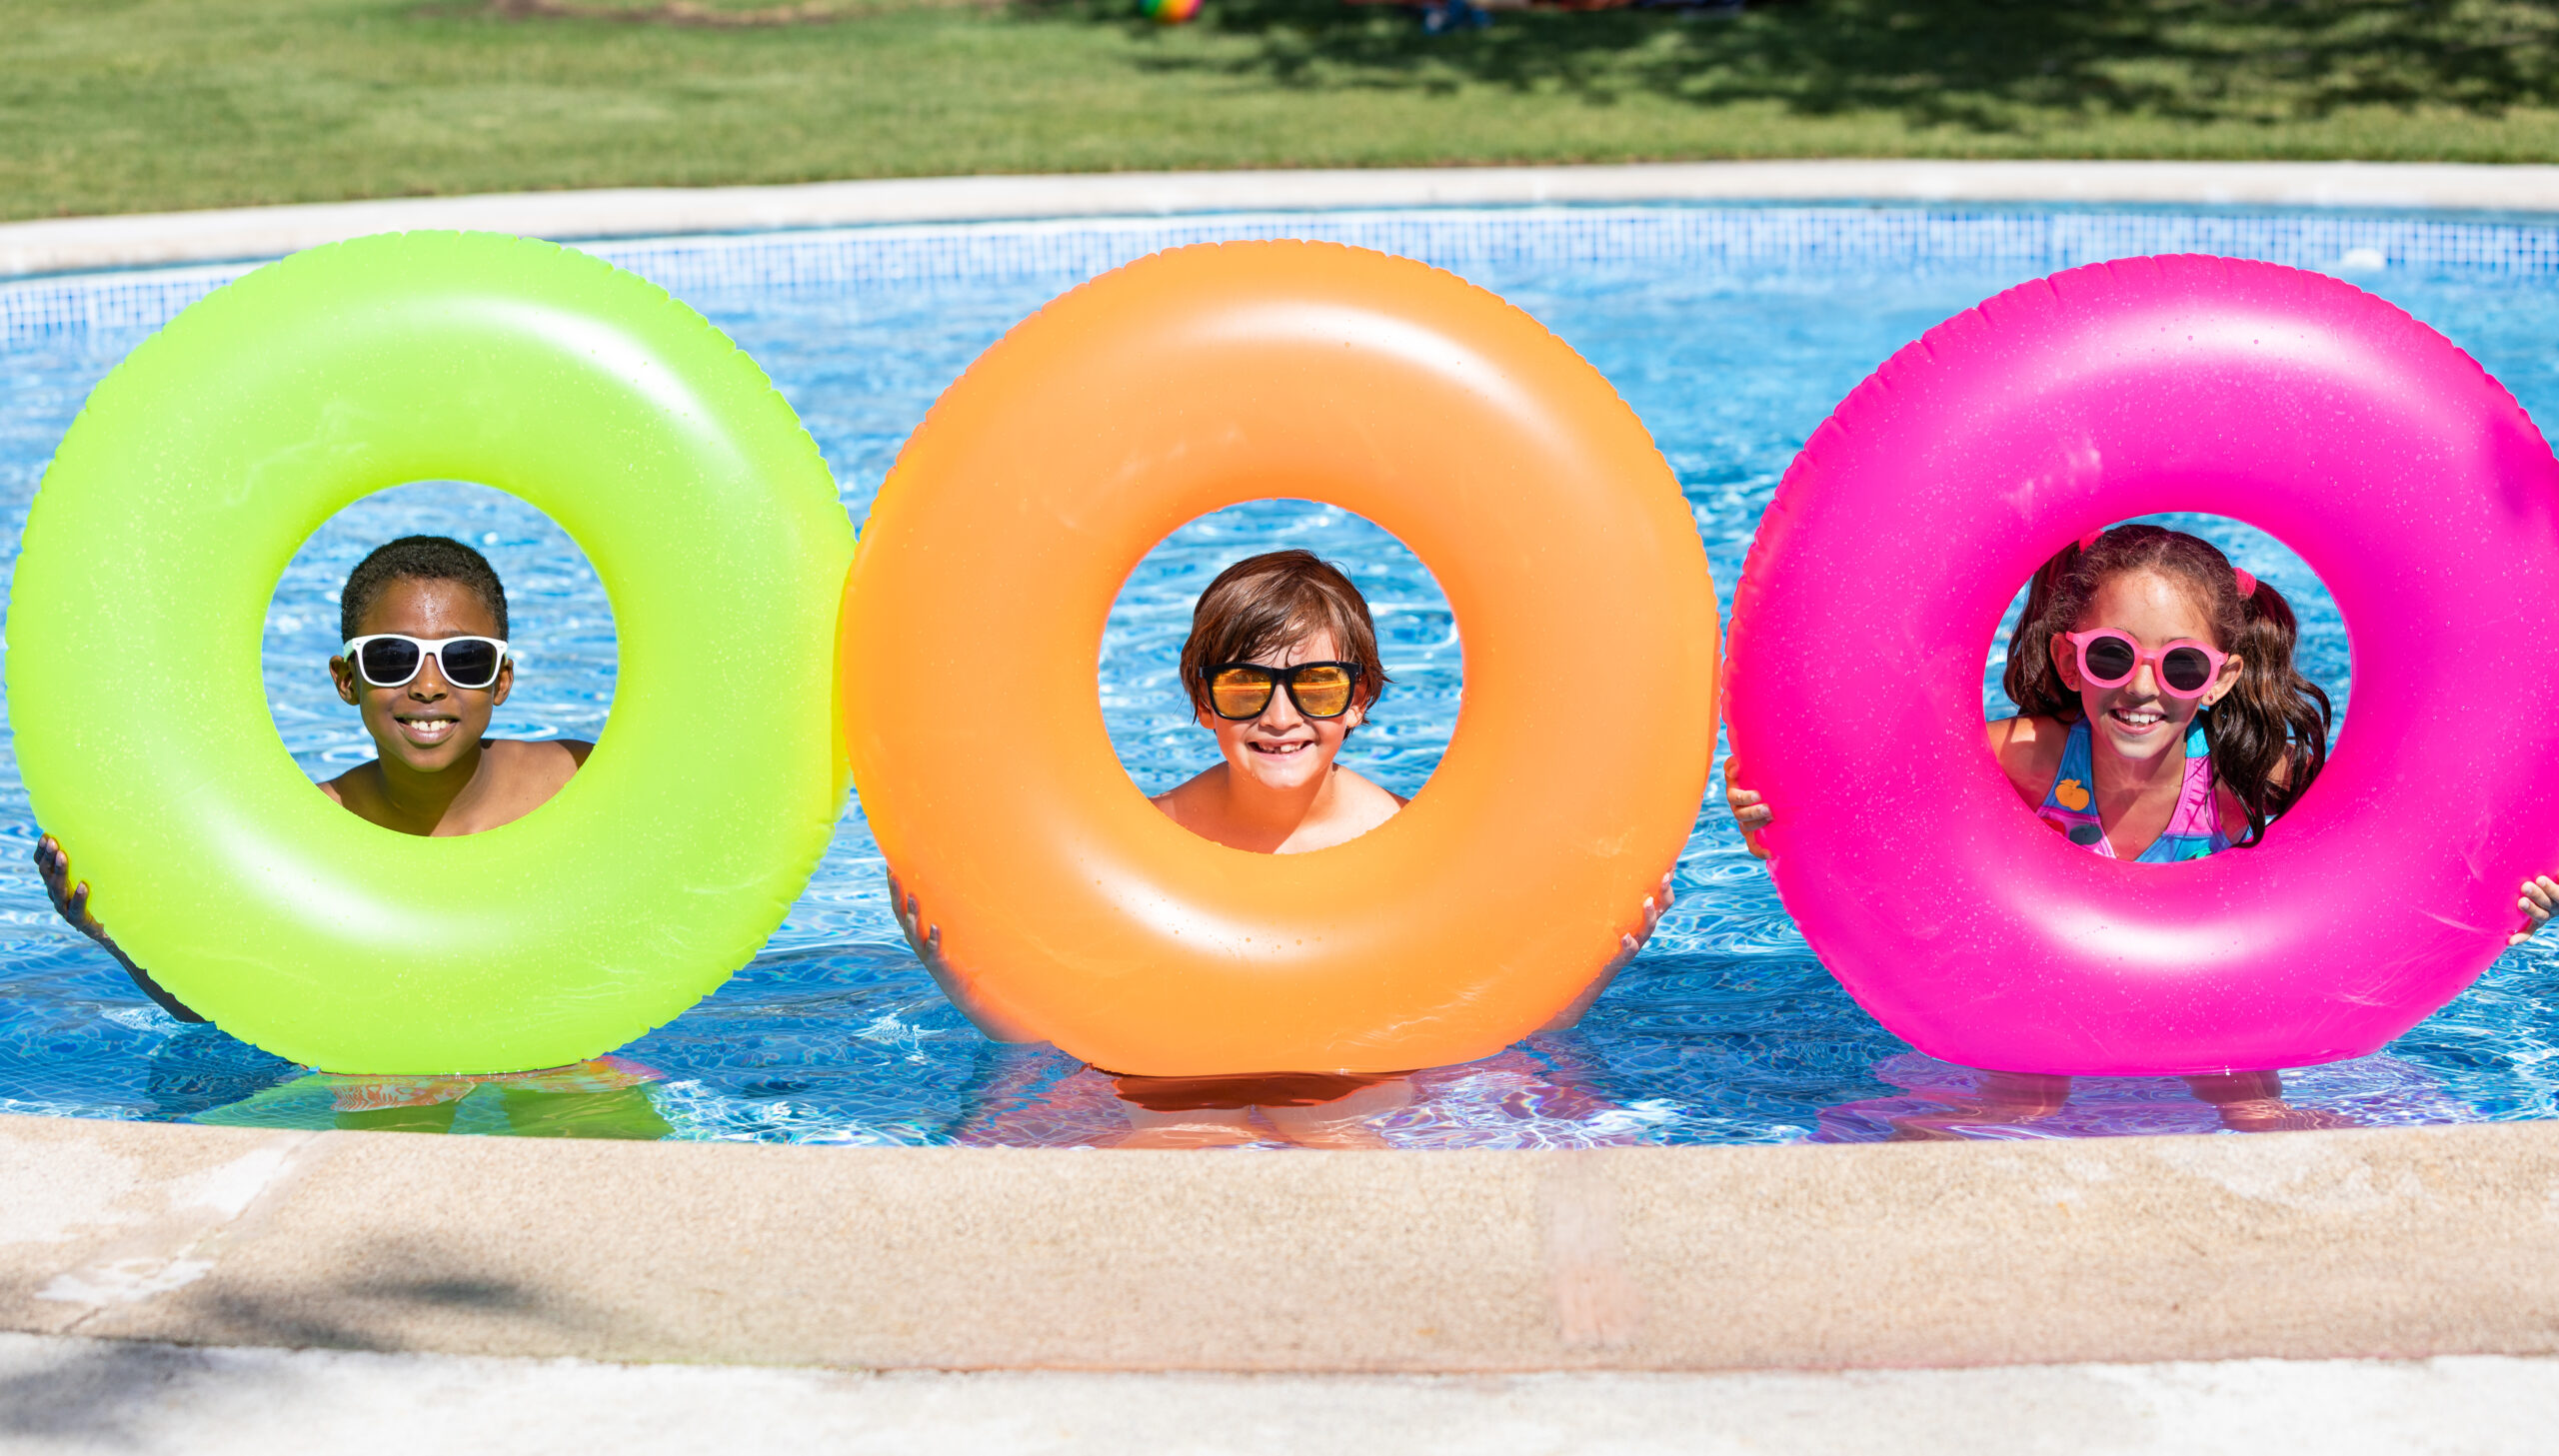 kids smiling and happy at the pool holding up colorful innertubes